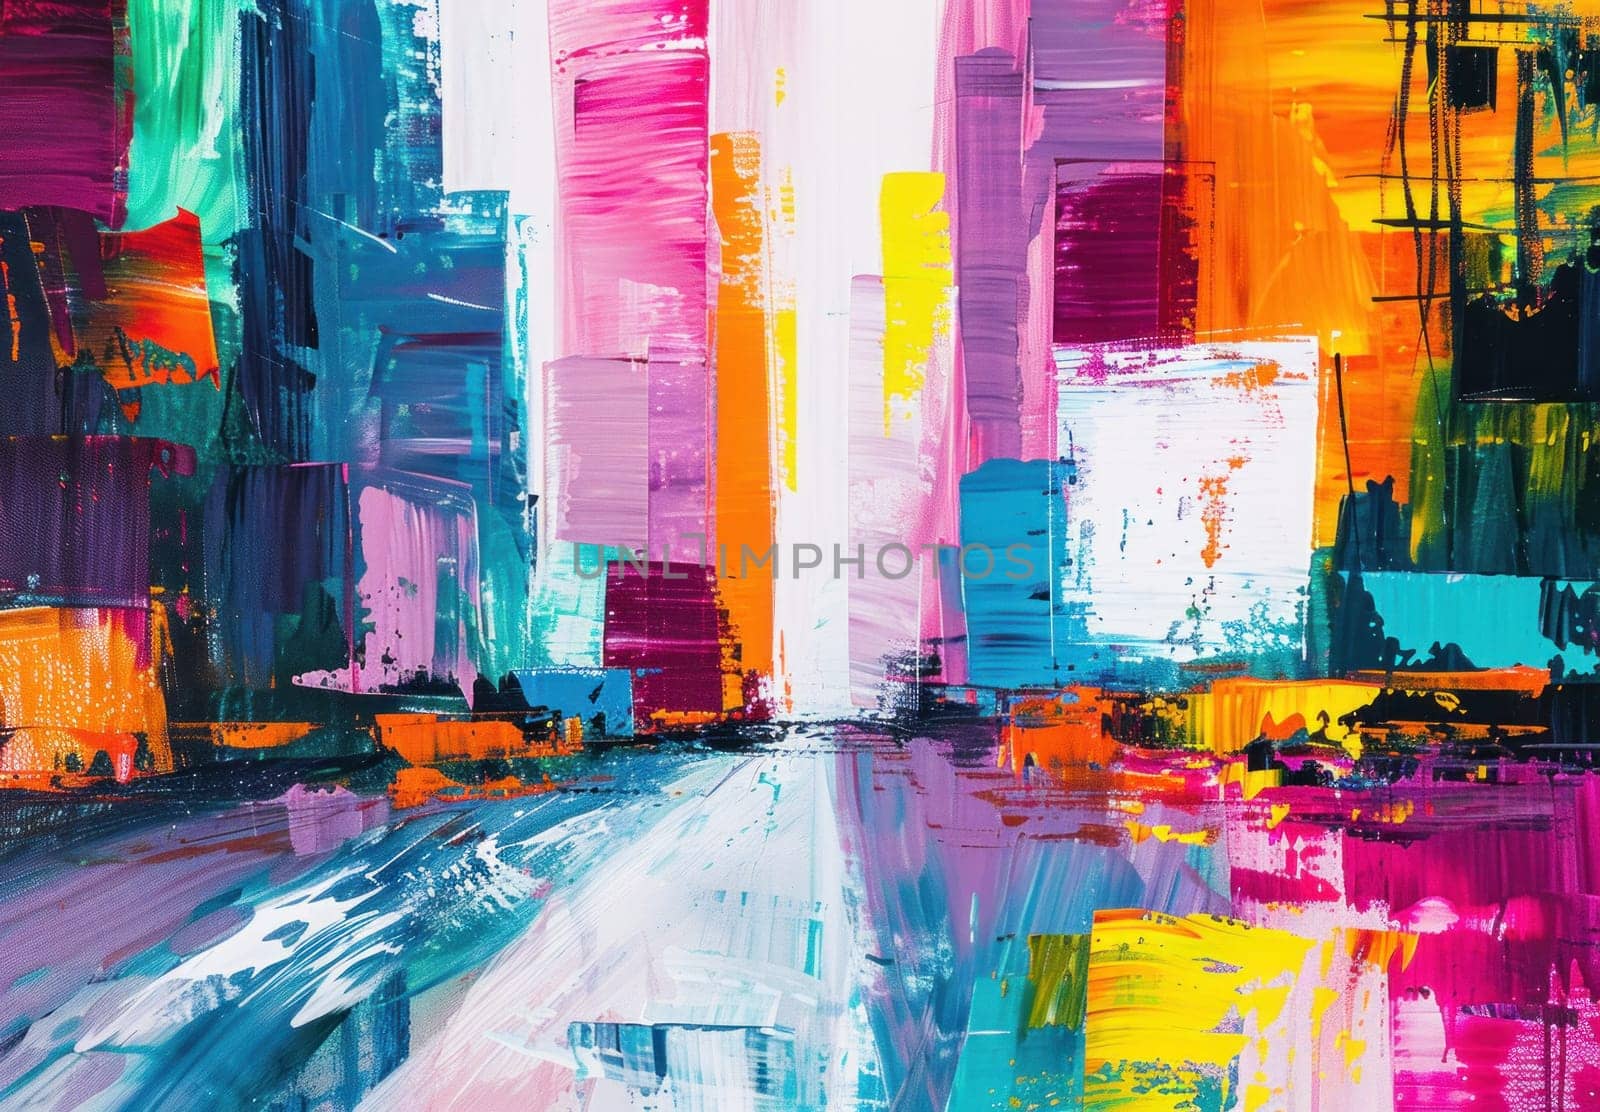 Abstract cityscape vibrant buildings in various shapes and colors representing urban diversity and creativity